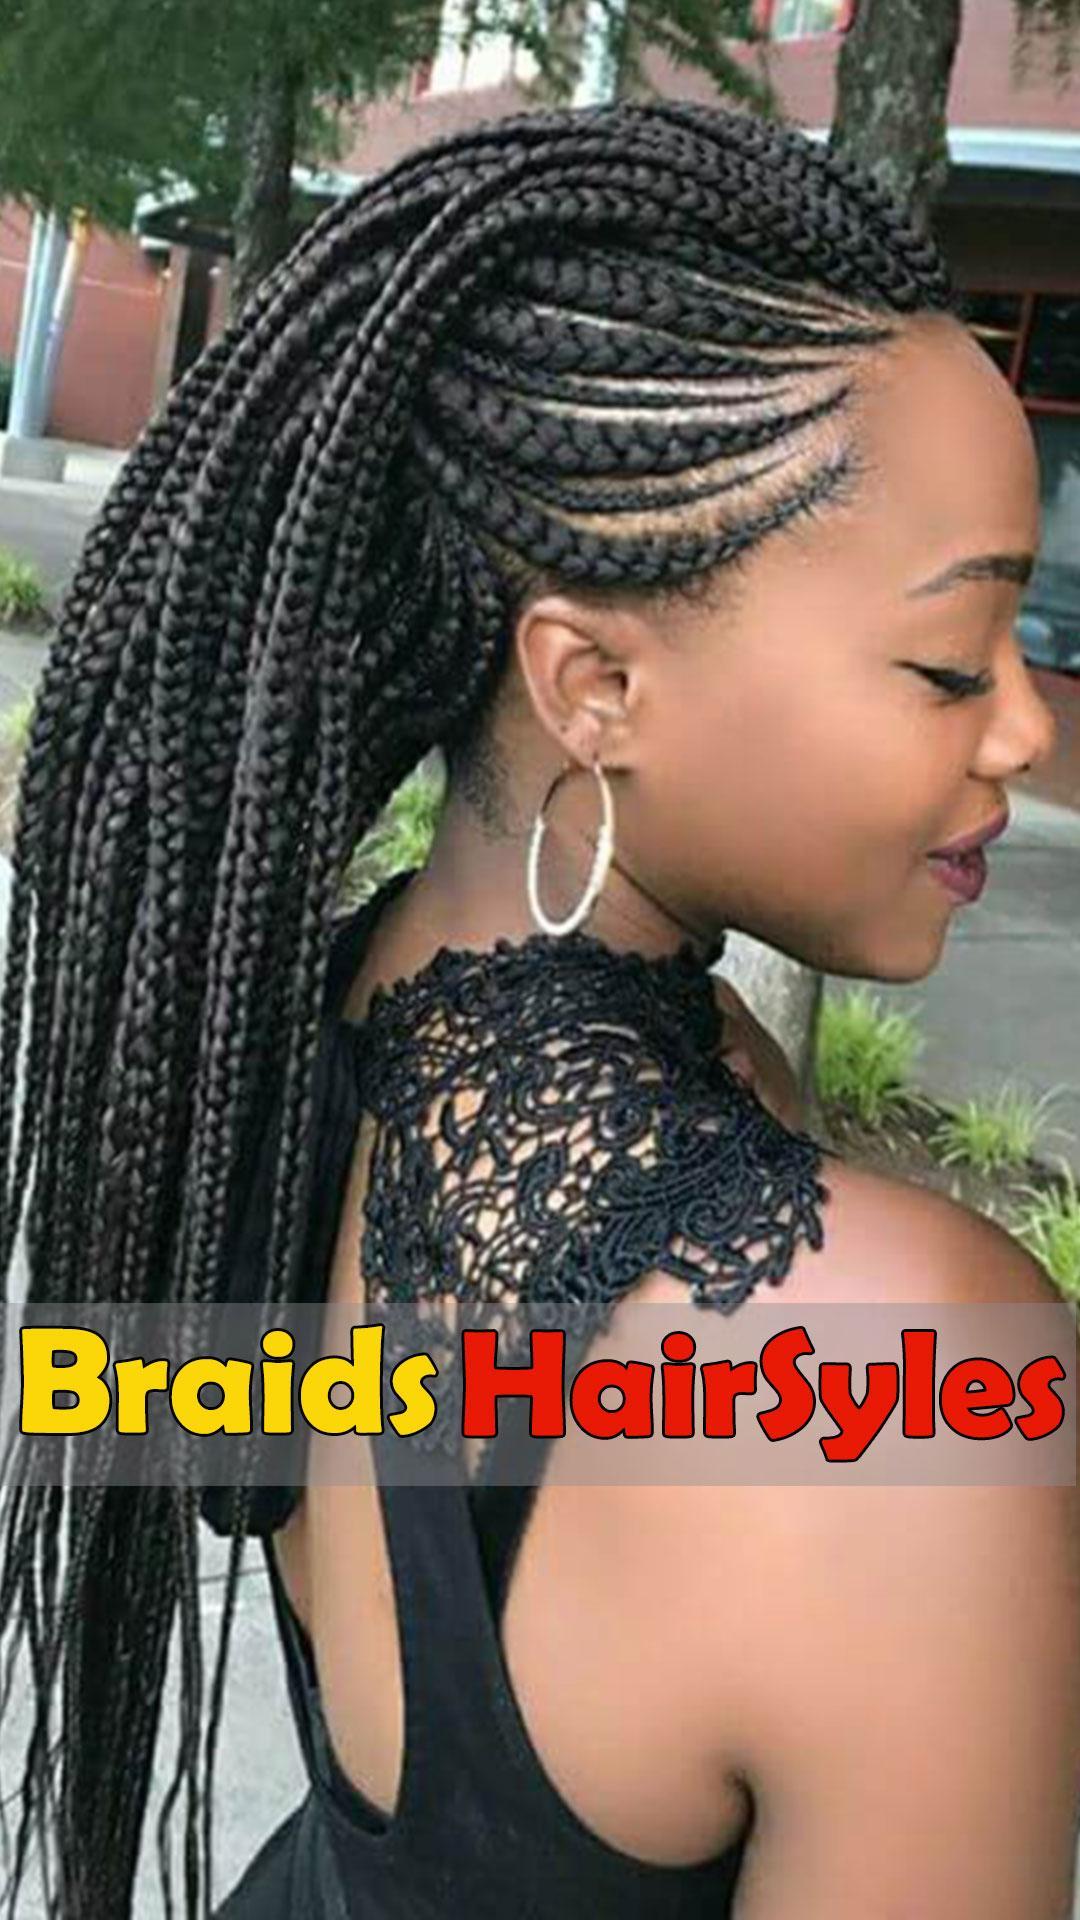 Girls Braid Hairstyles 2019 For Android Apk Download